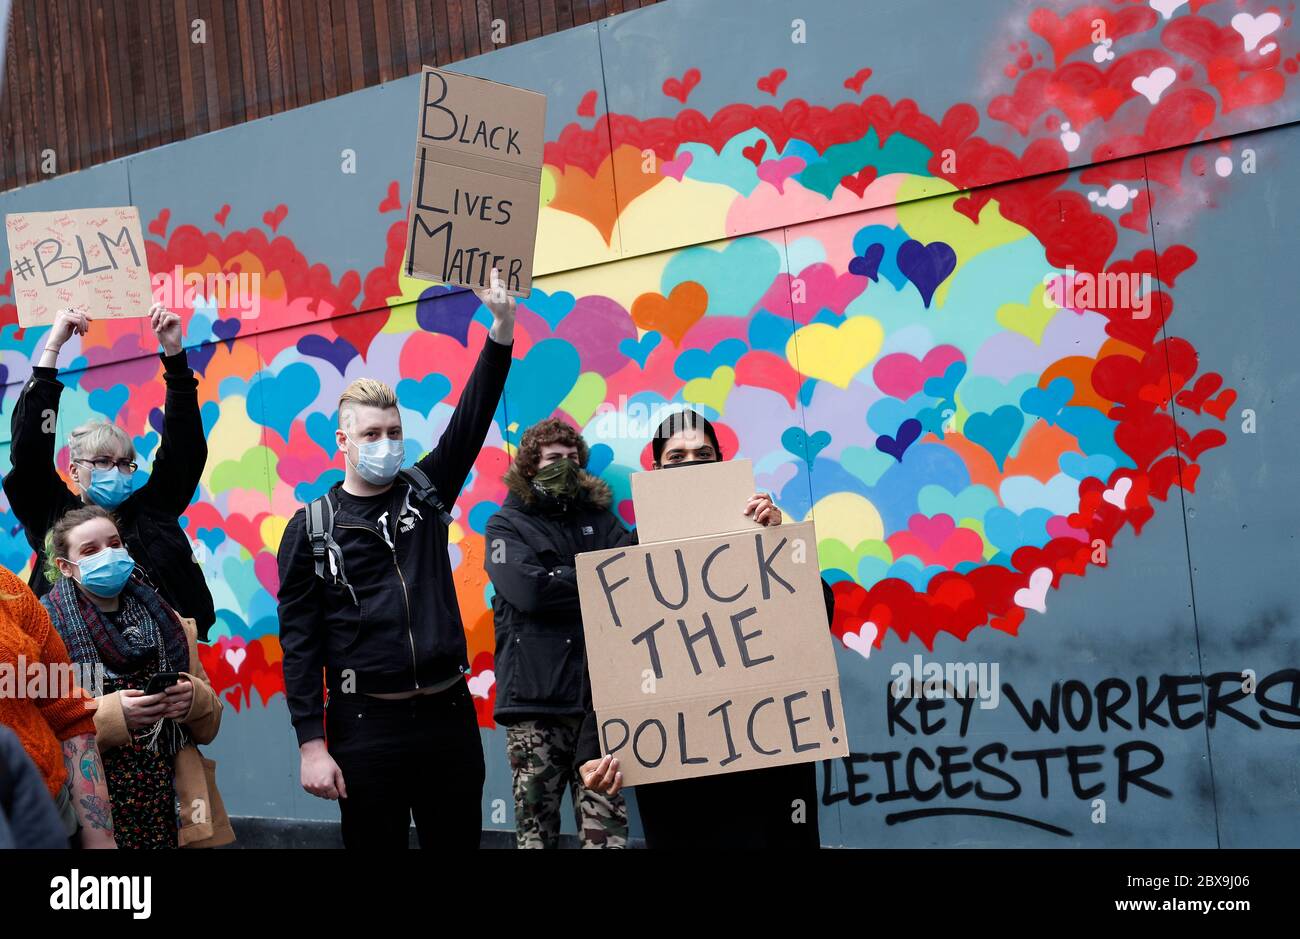 Leicester, Leicestershire, UK. 6th June 2020. Protesters attend a 'Black lives matter' demonstration following the death of American George Floyd while in the custody of Minneapolis police. Credit Darren Staples/Alamy Live News. Stock Photo